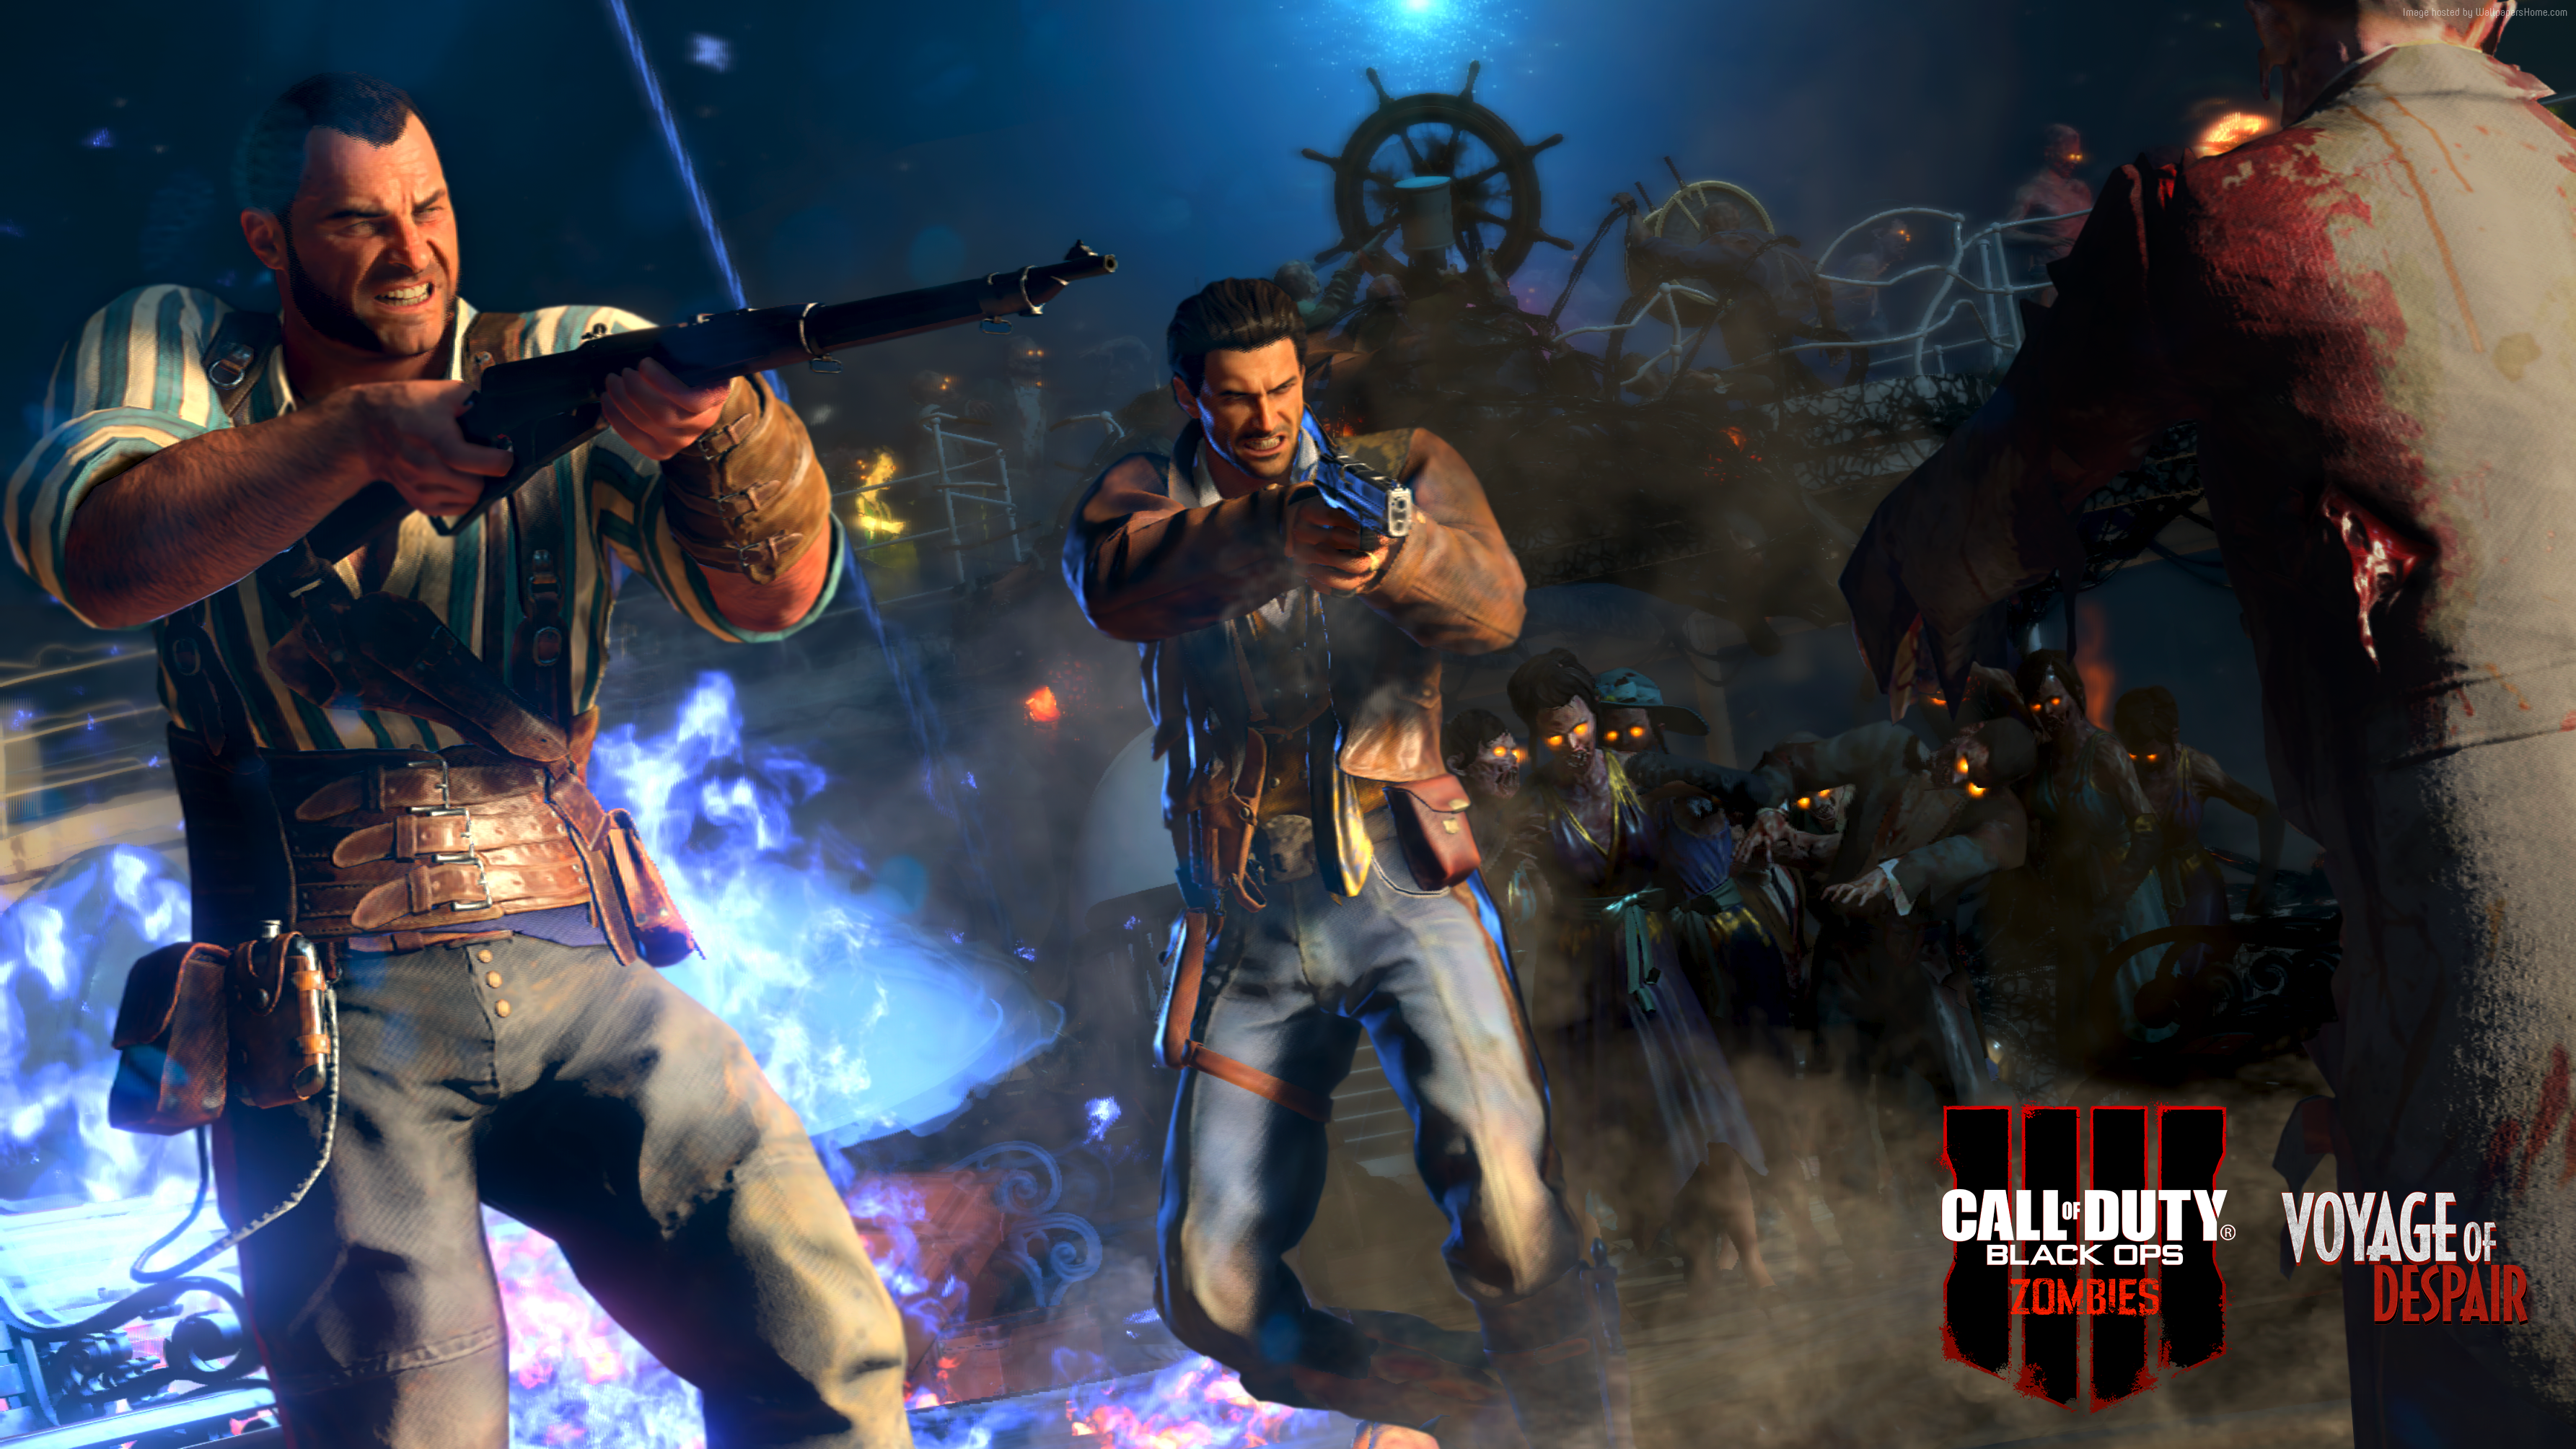 Call Of Duty Black Ops 4 Zombies Wallpaper 4k WALLPAPER GAME HD